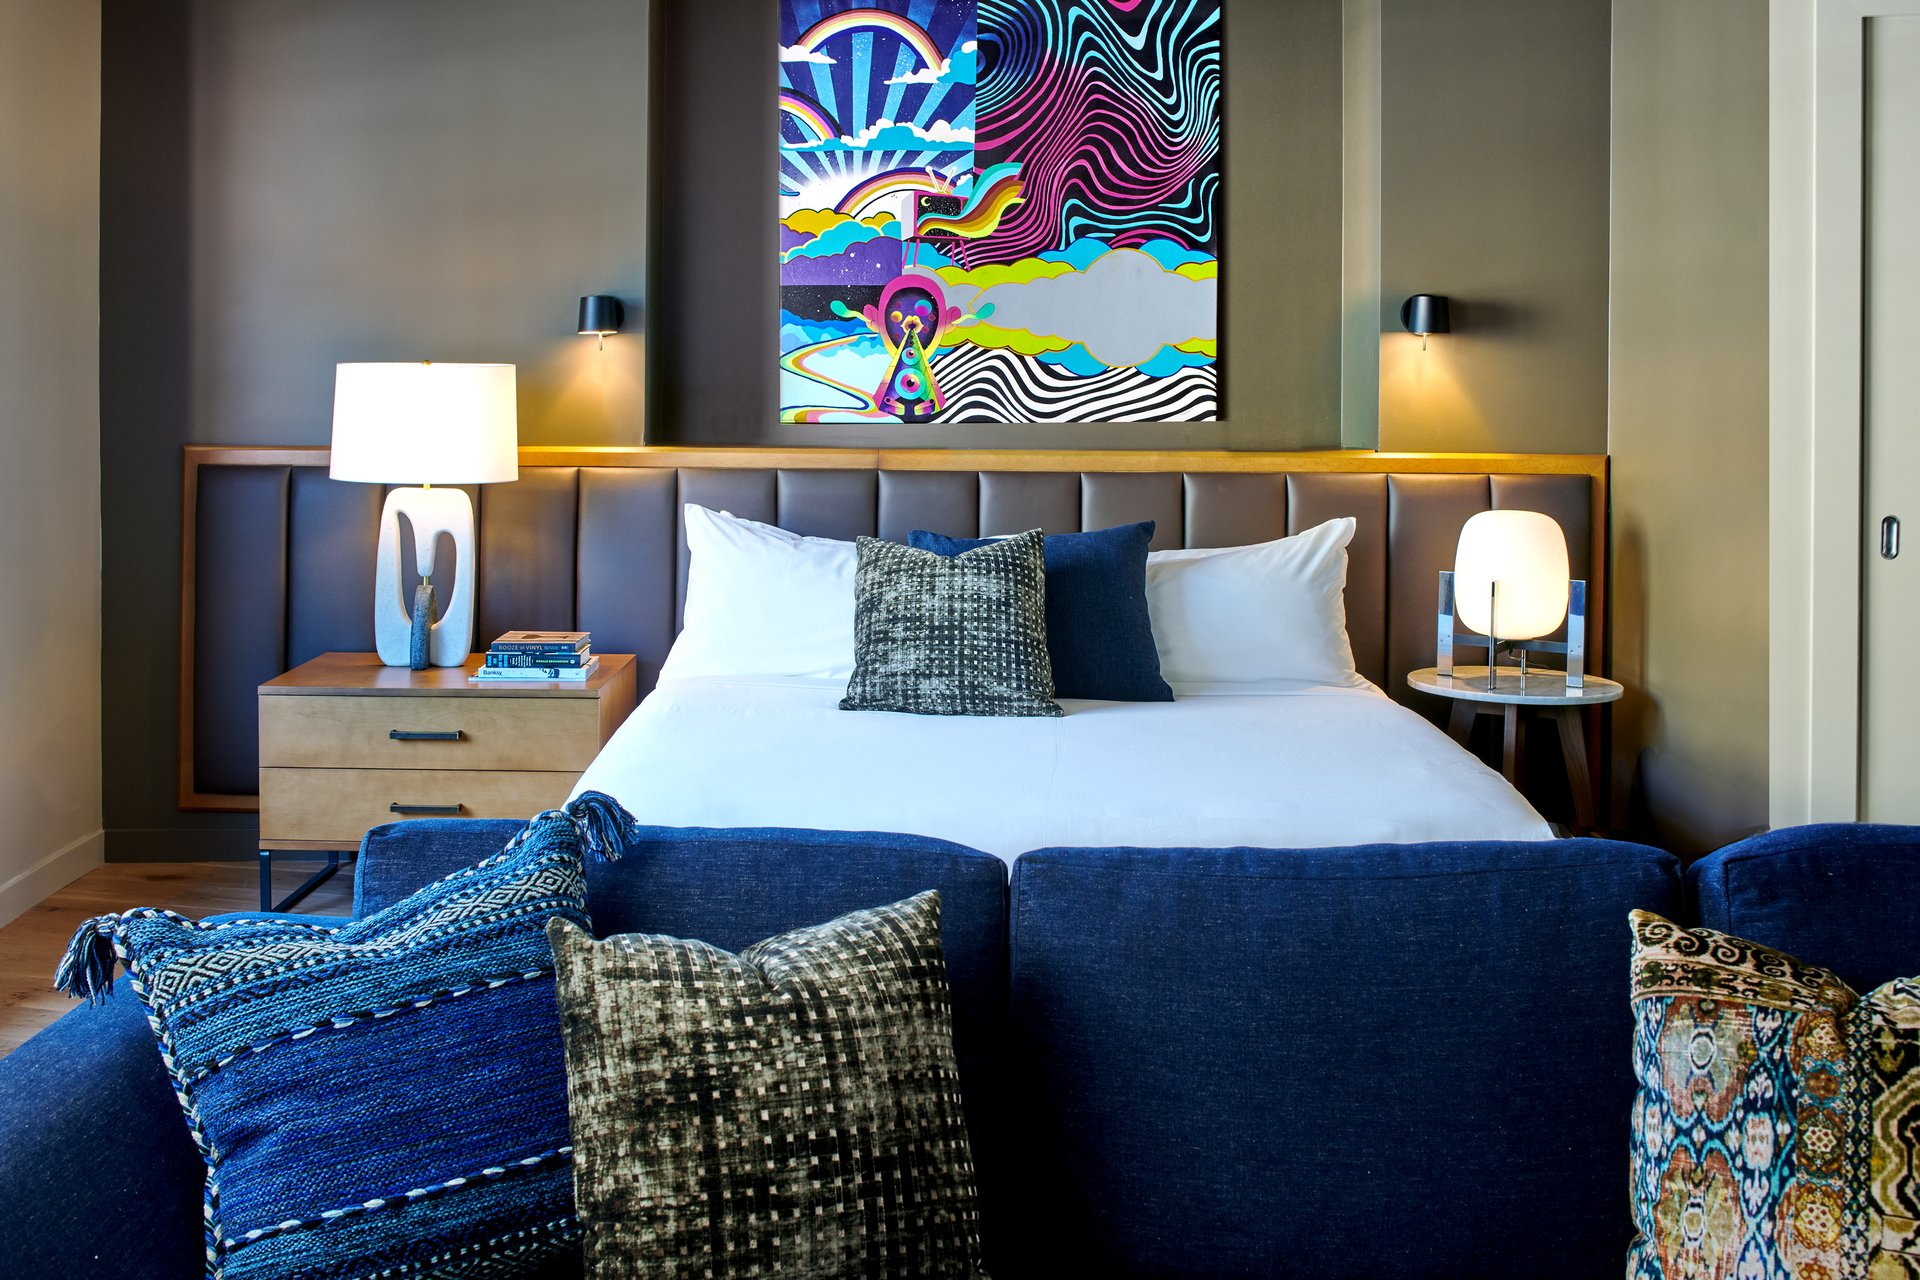 Bedroom with blue sofa and colourful wall art